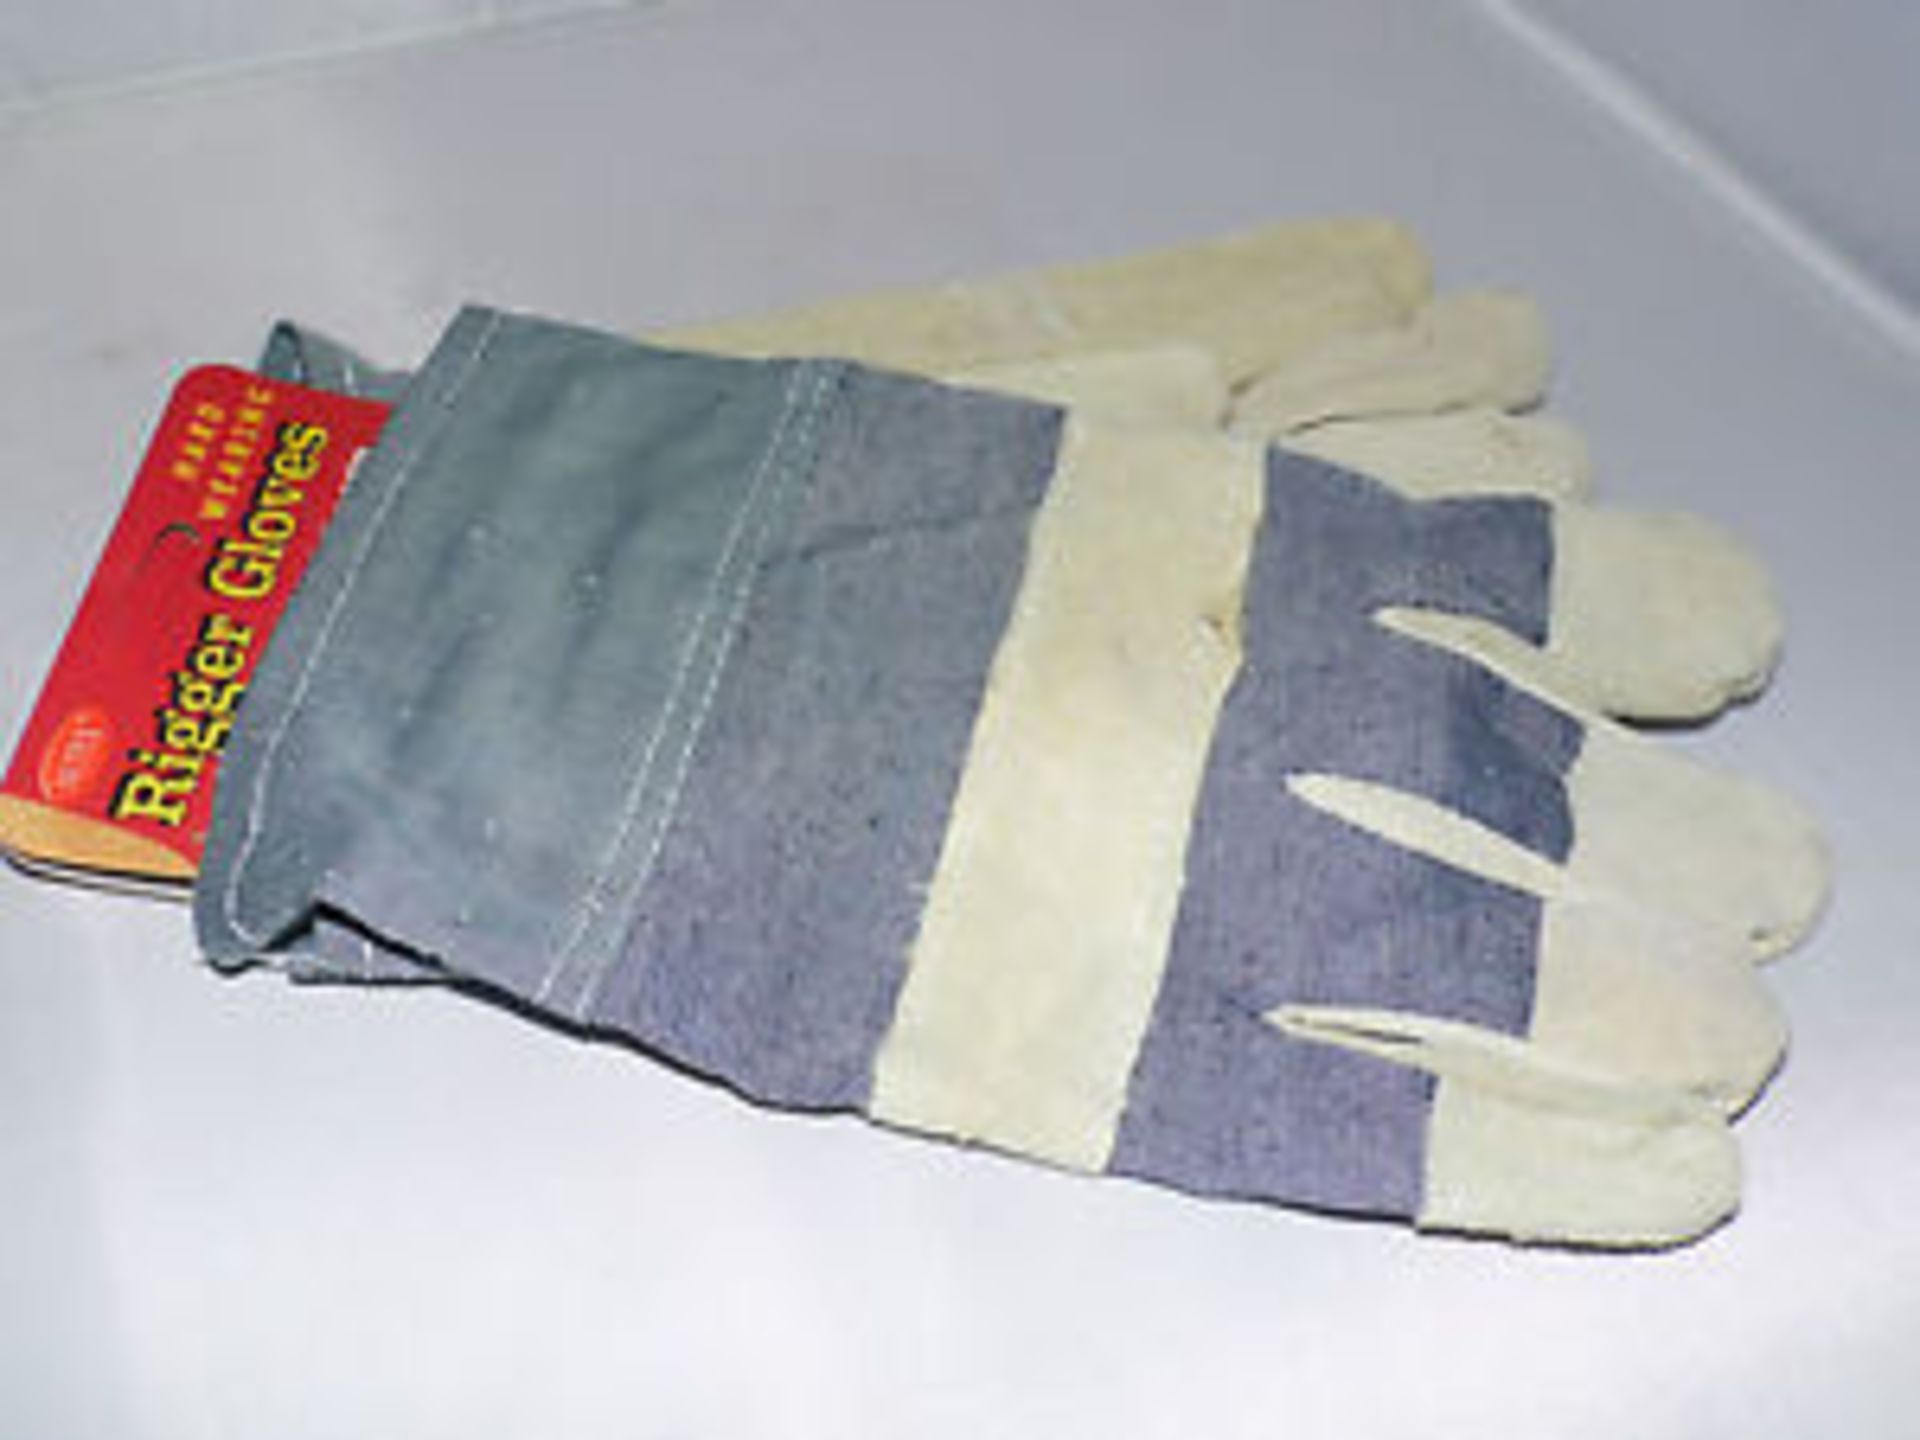 V *TRADE QTY* Brand New 12 Pairs Of Leather Rigger Gloves RRP £59.88 X 4 YOUR BID PRICE TO BE